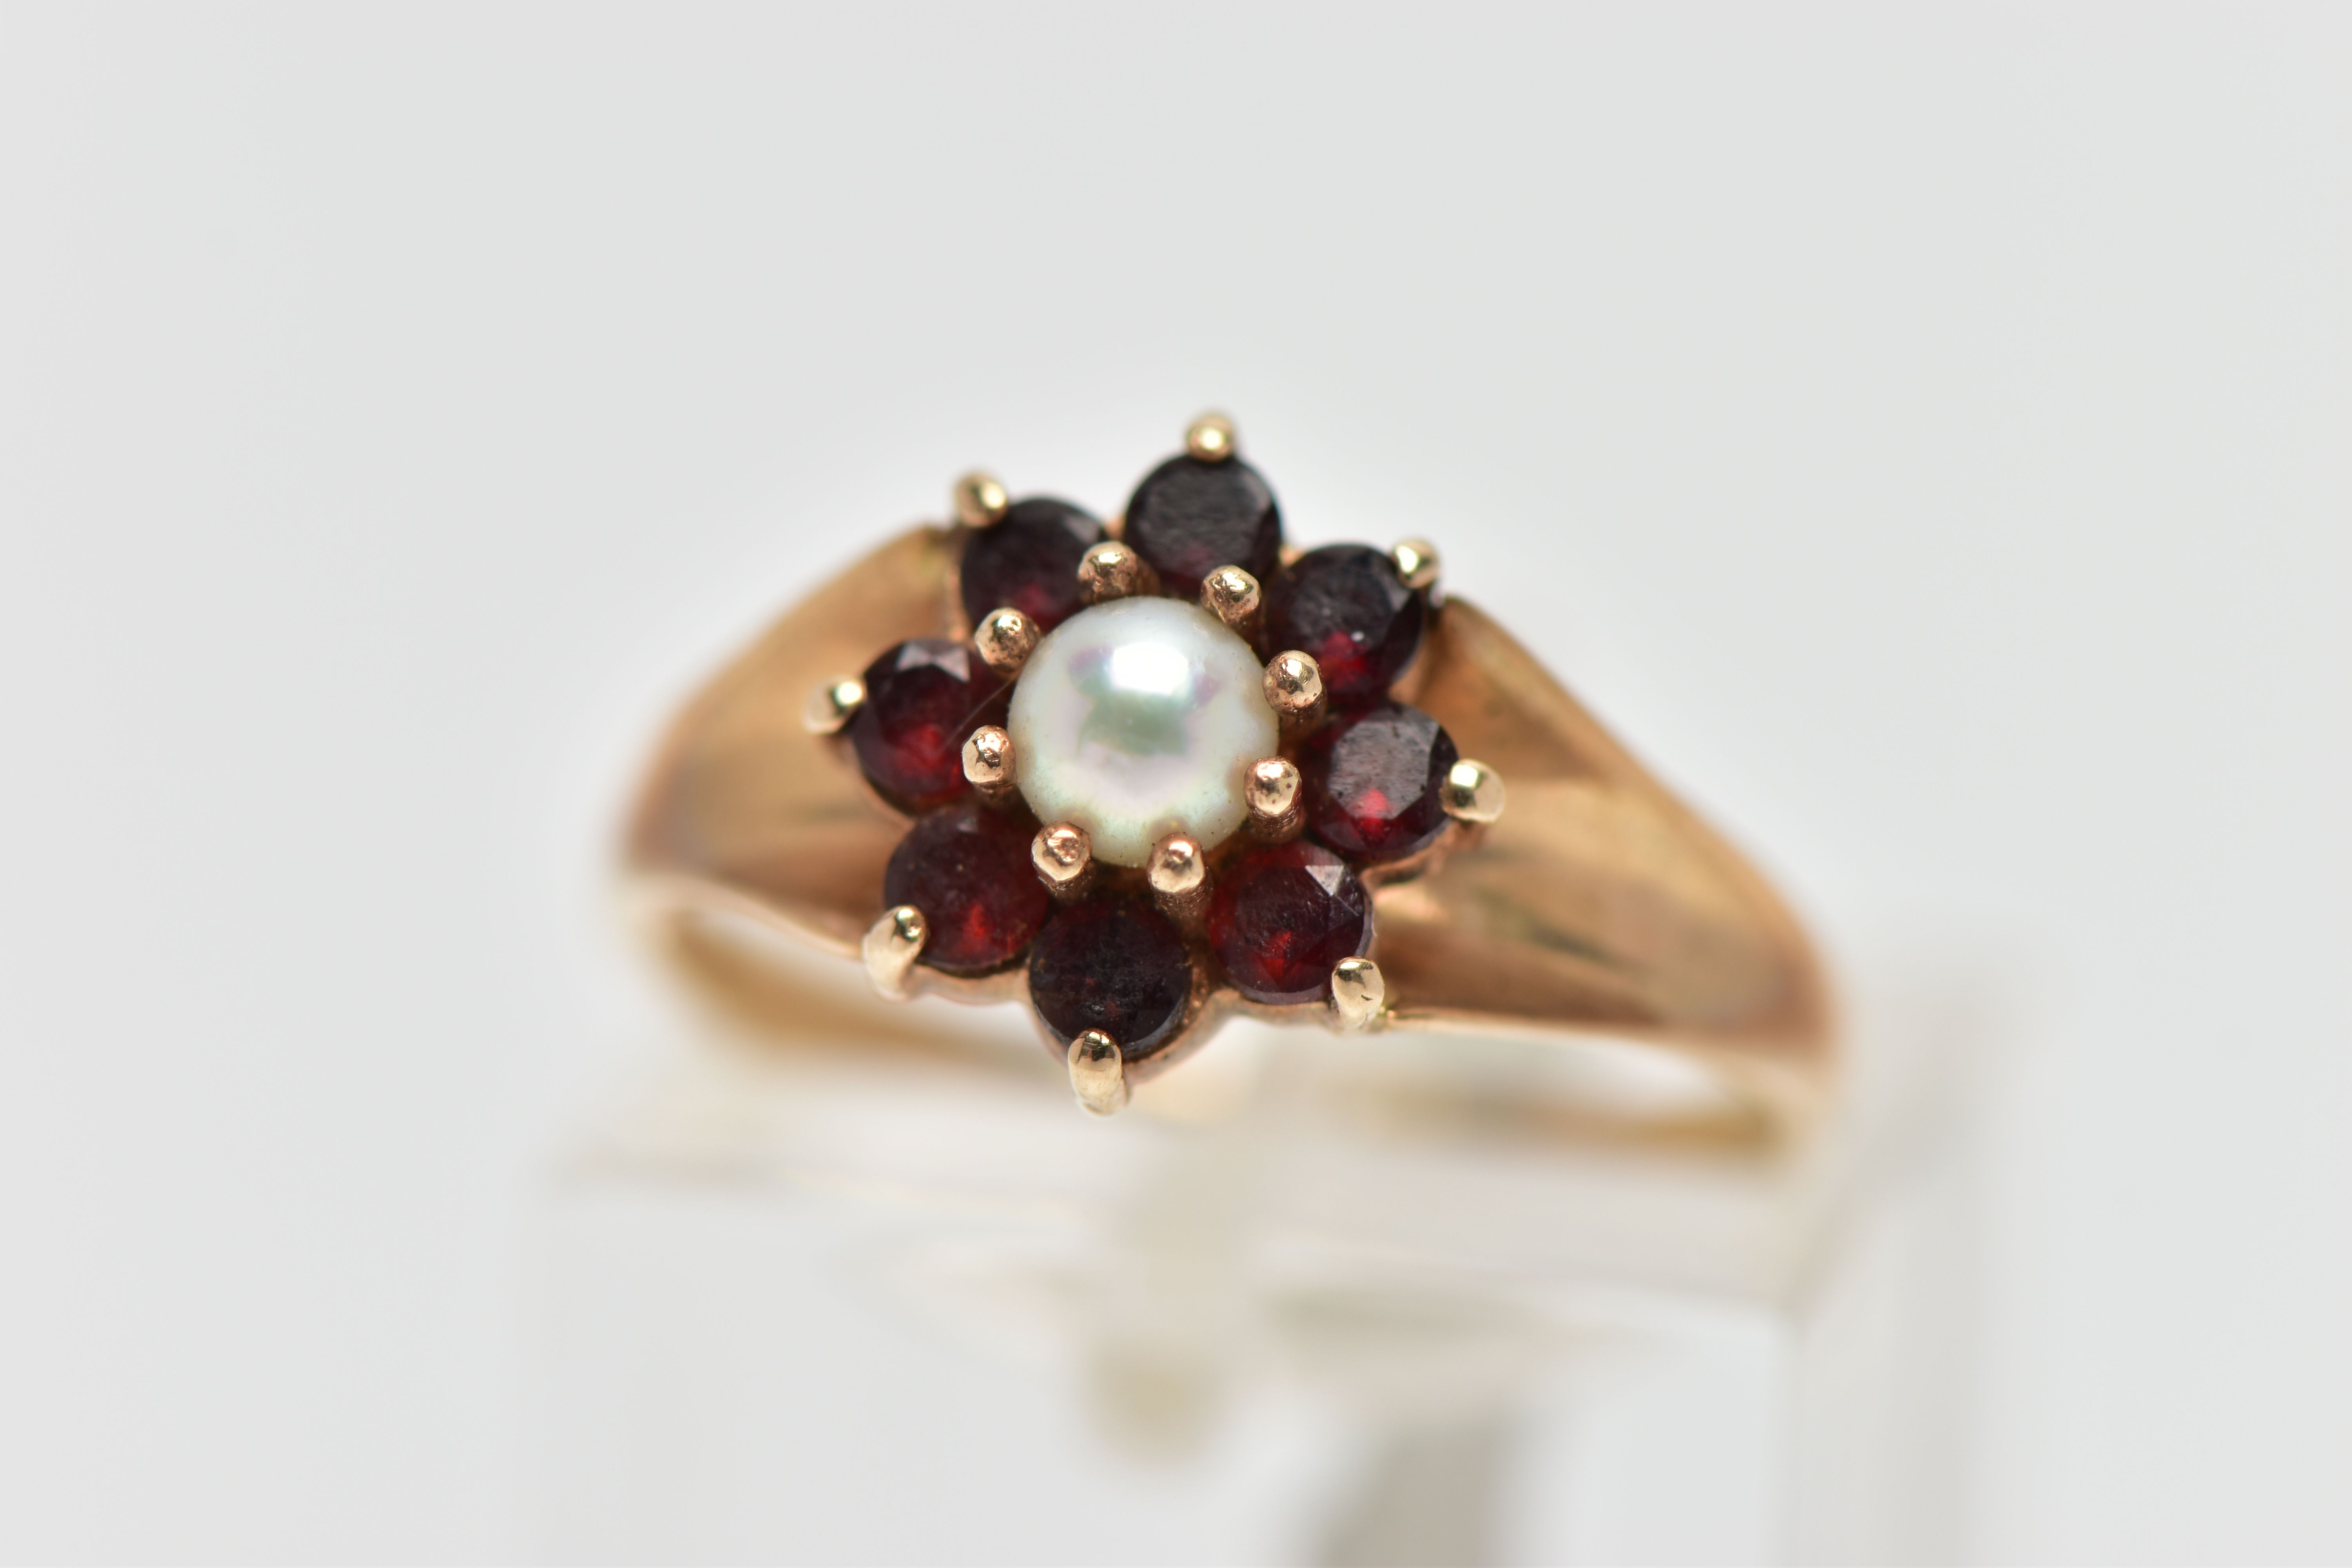 A 9CT GOLD CULTURED PEARL AND GARNET CLUSTER RING, the claw set cultured pearl, with circular cut